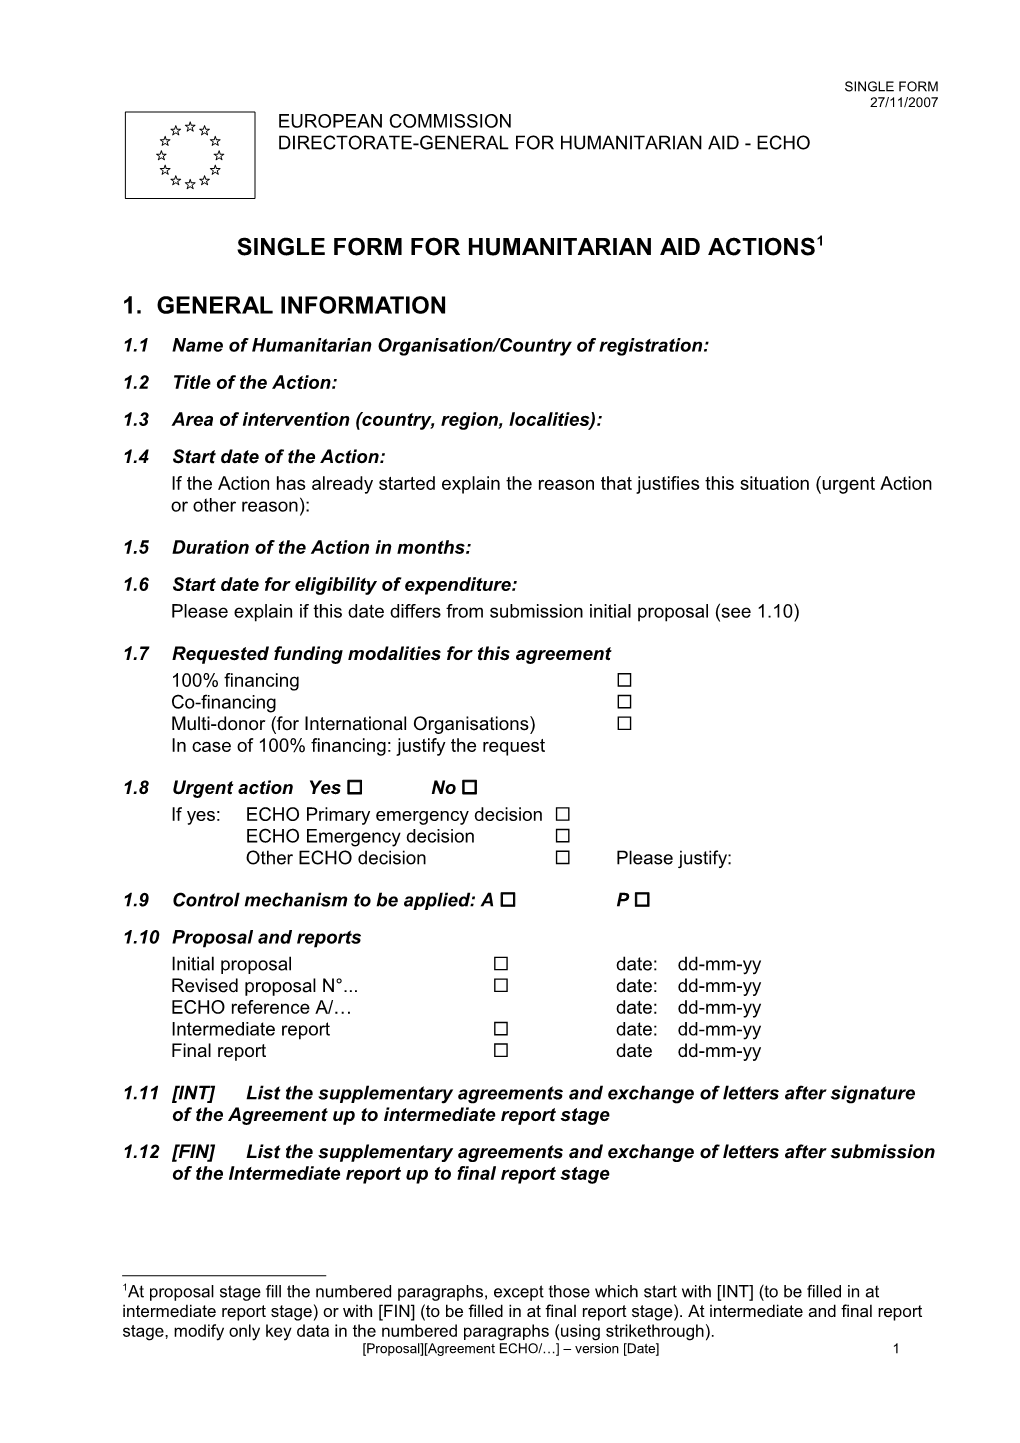 Single Form for Humanitarian Aid Actions